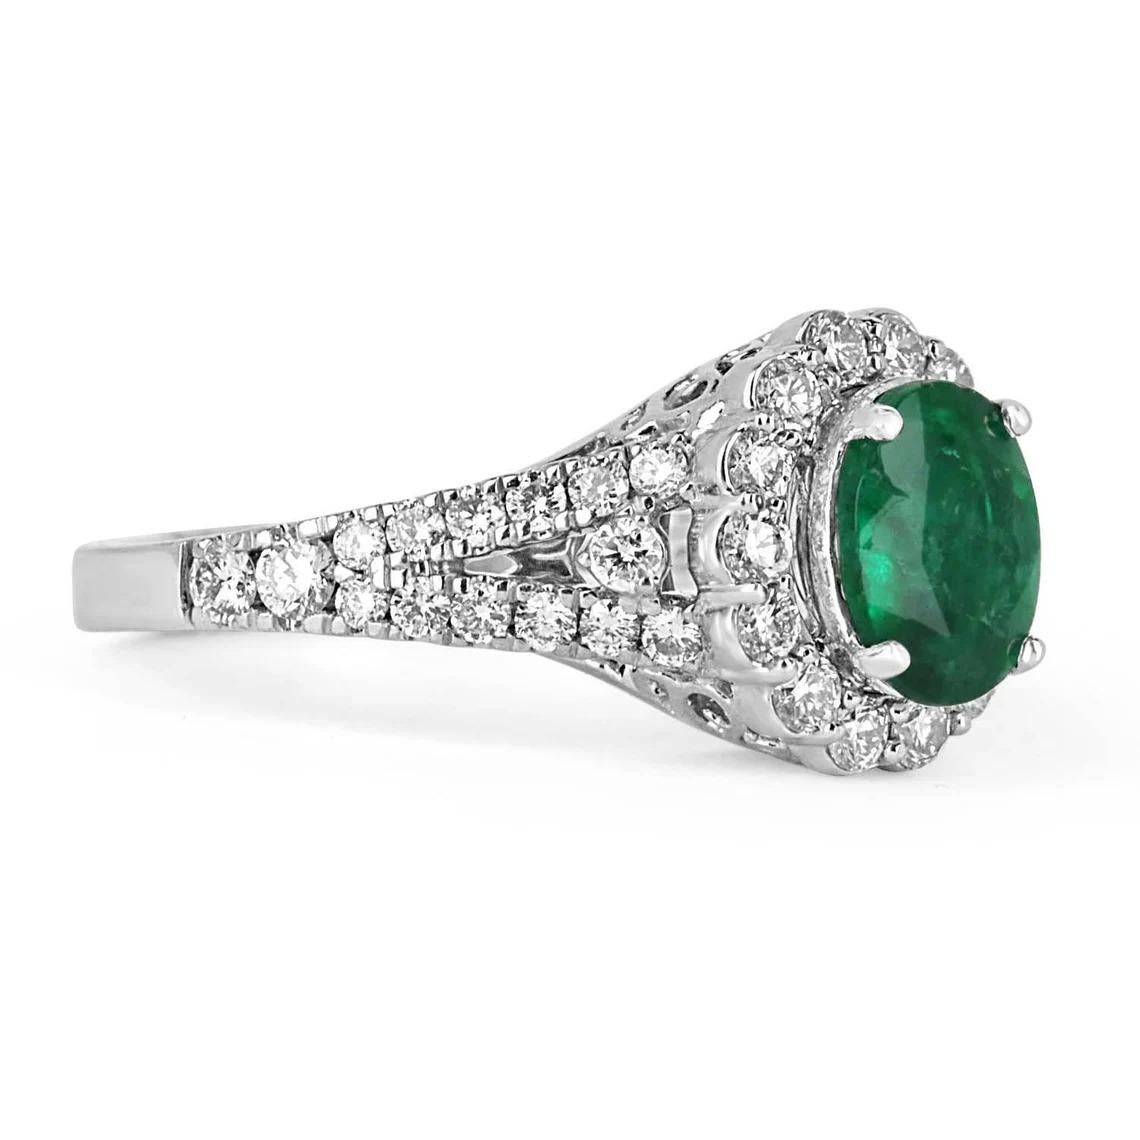 An exquisite oval emerald and diamond engagement/right-hand ring. The gorgeous setting lets sit a genuine, earth-mined, natural emerald with beautiful color and very-good eye clarity. The emerald is not perfect, and small imperfections do exist as